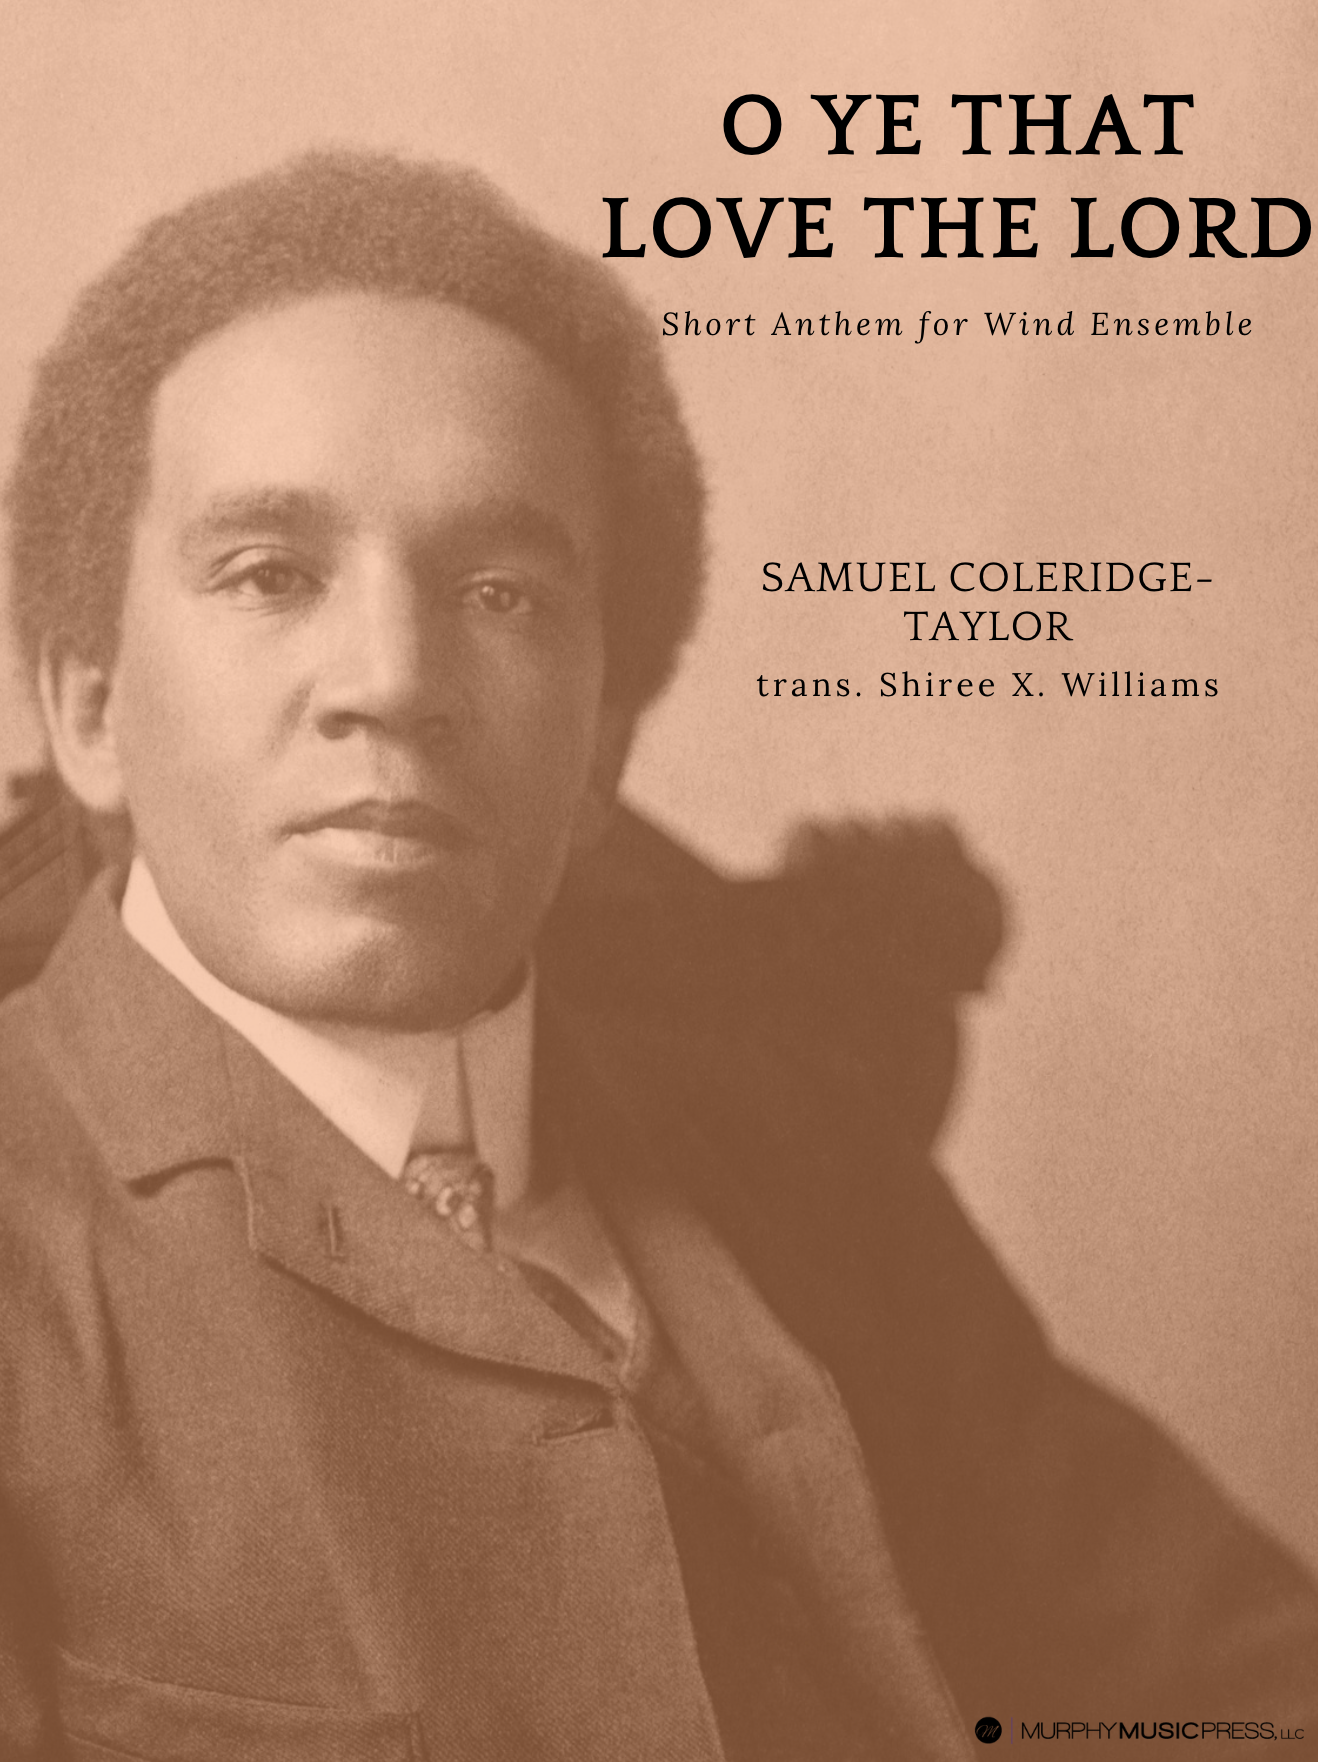 O Ye That Love The Lord (Score Only) by Samuel Coleridge-Taylor, arr. Shiree X. Williams